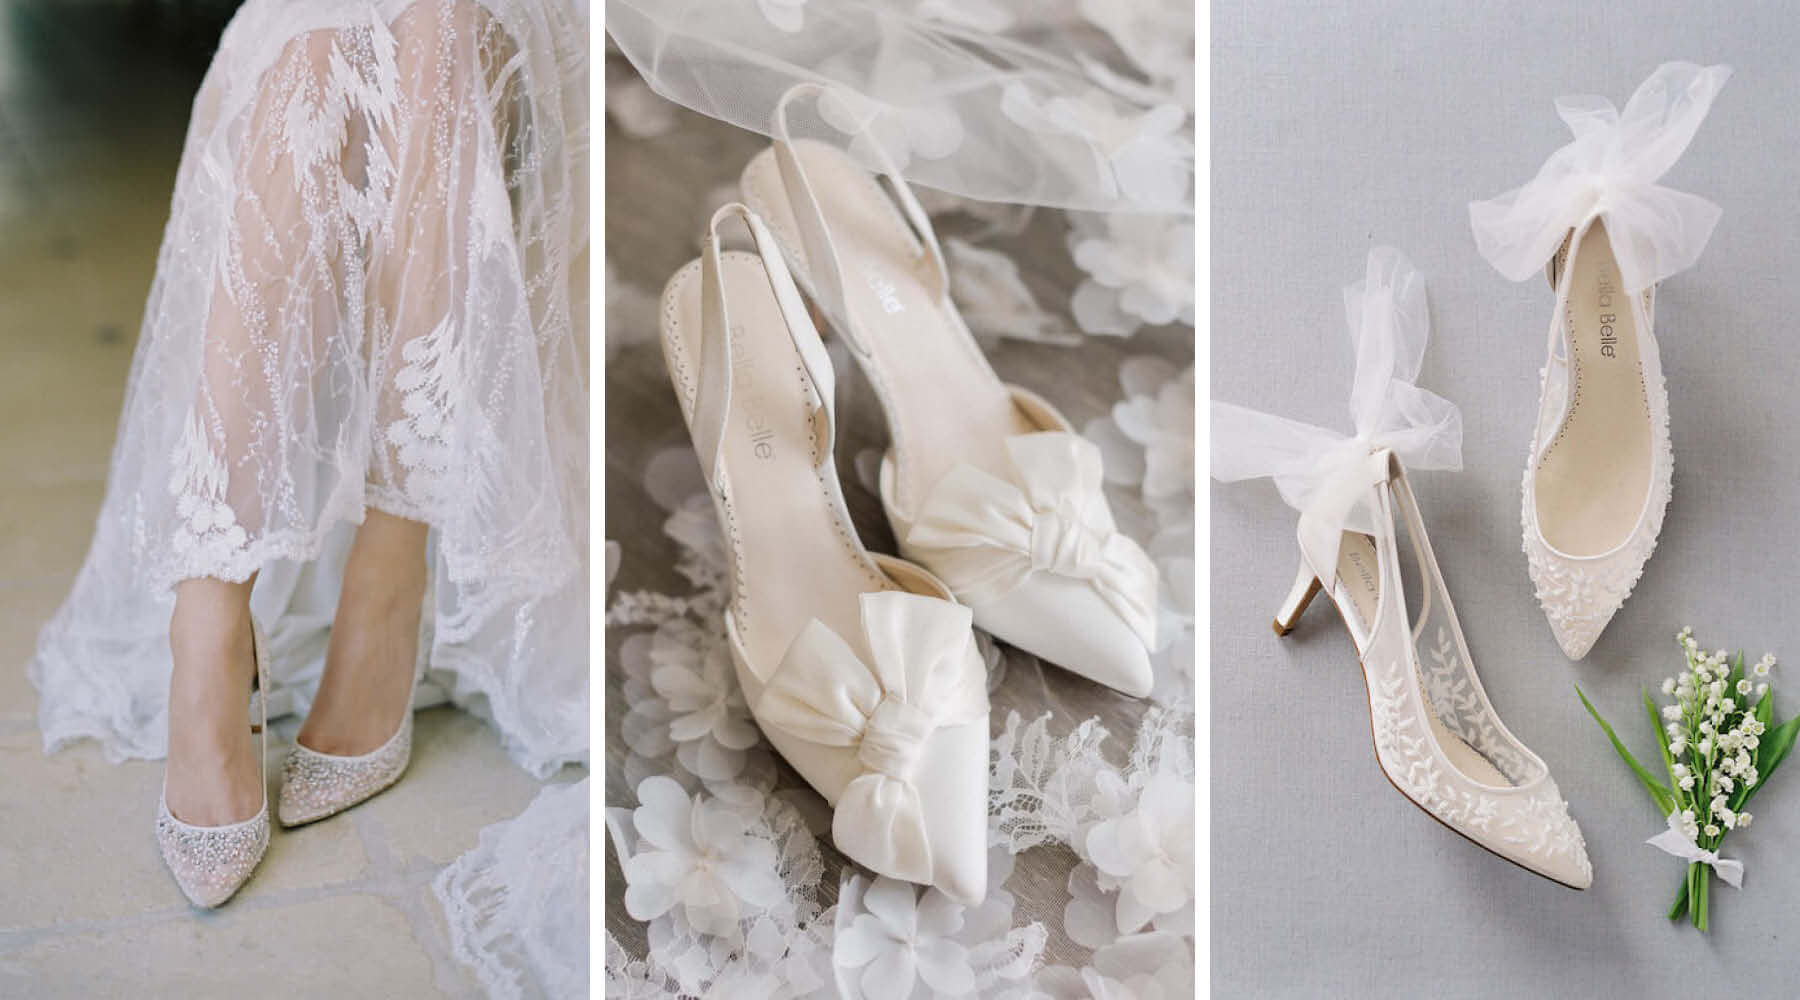 Where To Shop For Unique Bridal Shoes For Your Wedding Day